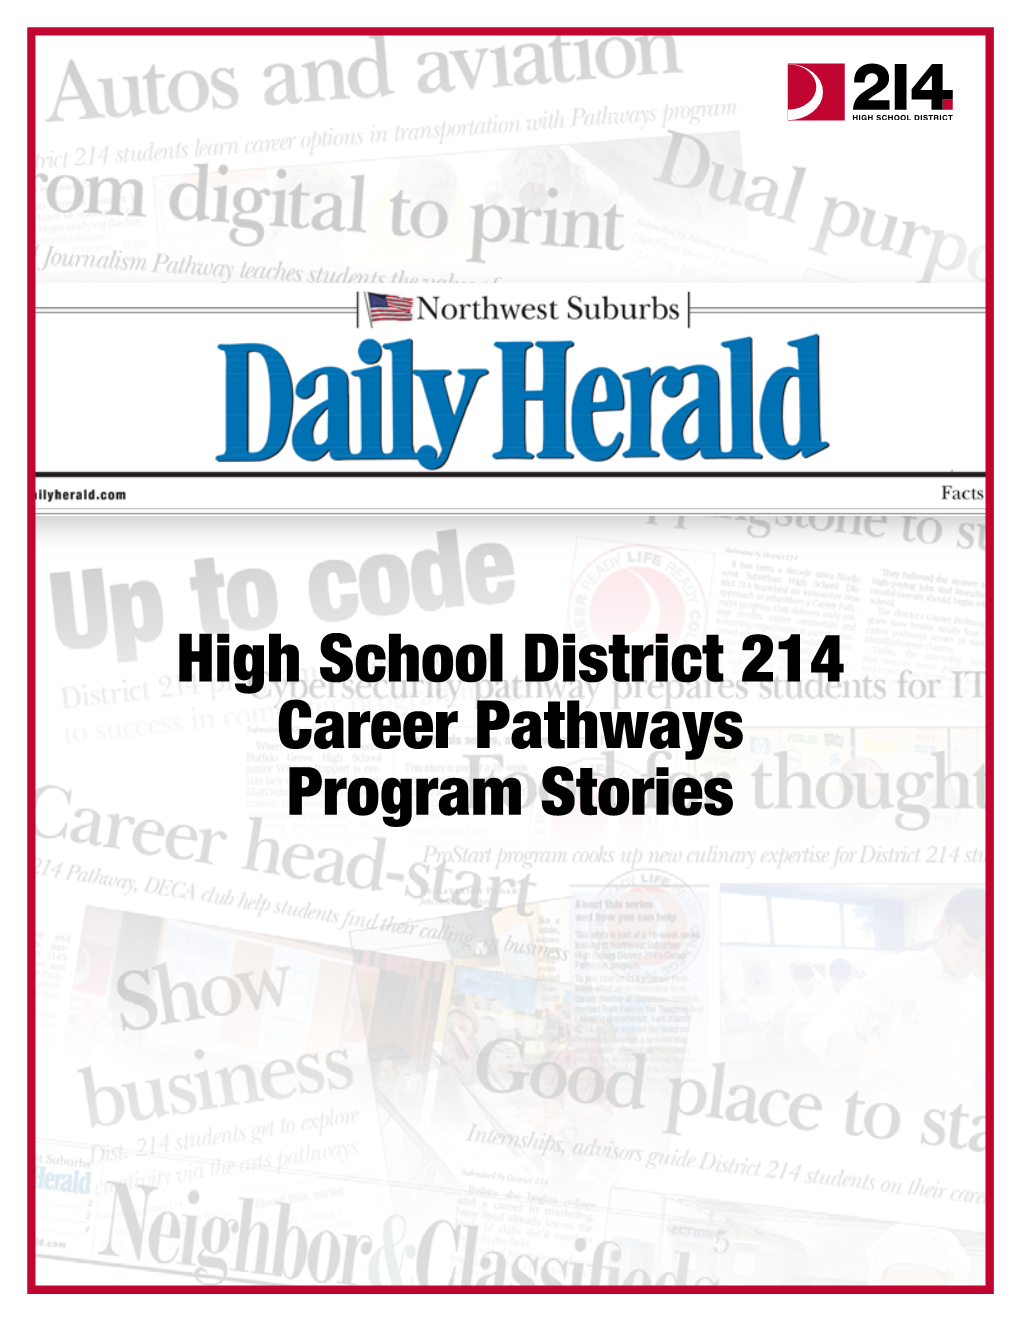 High School District 214 Career Pathways Program Stories FRIDAY, MAY 4, 2018 FRIDAY, MARCH 30, 2018 FRIDAY, MARCH 30,Section 2018 Northwest Suburbs 5